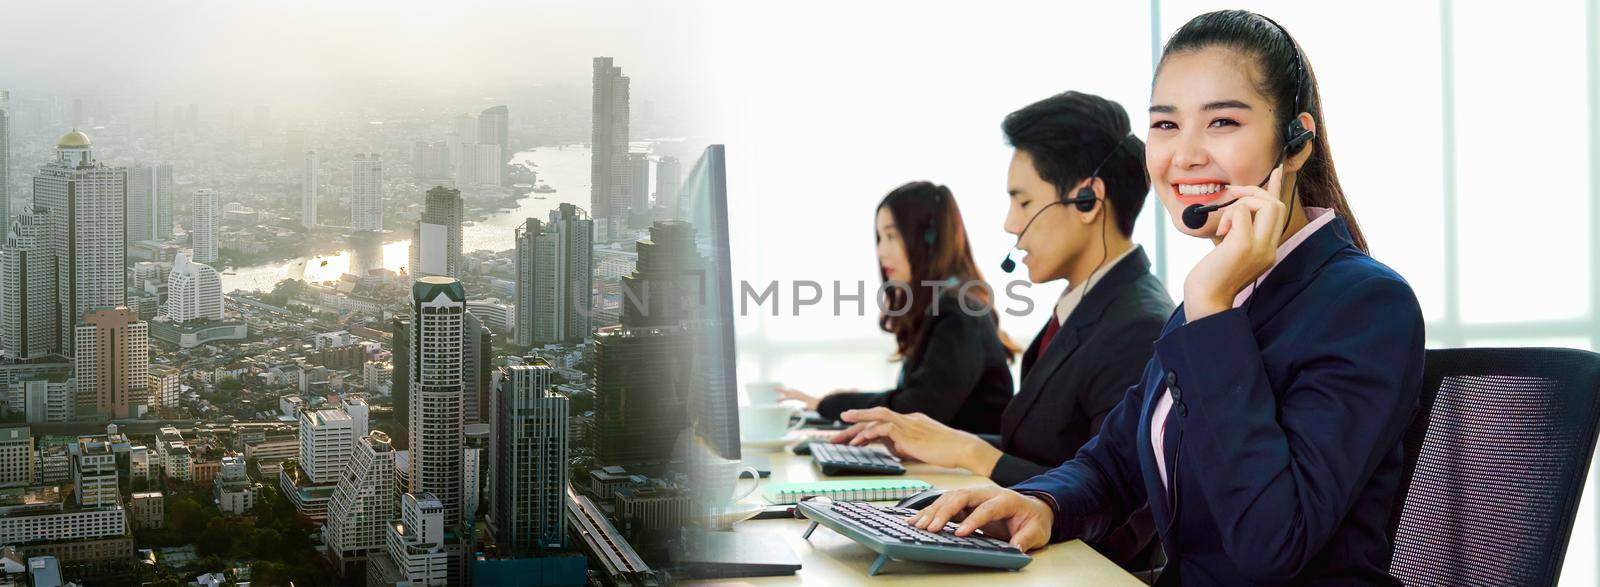 Business people wearing headset working in office in widen view to support remote customer or colleague. Call center, telemarketing, customer support agent provide service on telephone video call.